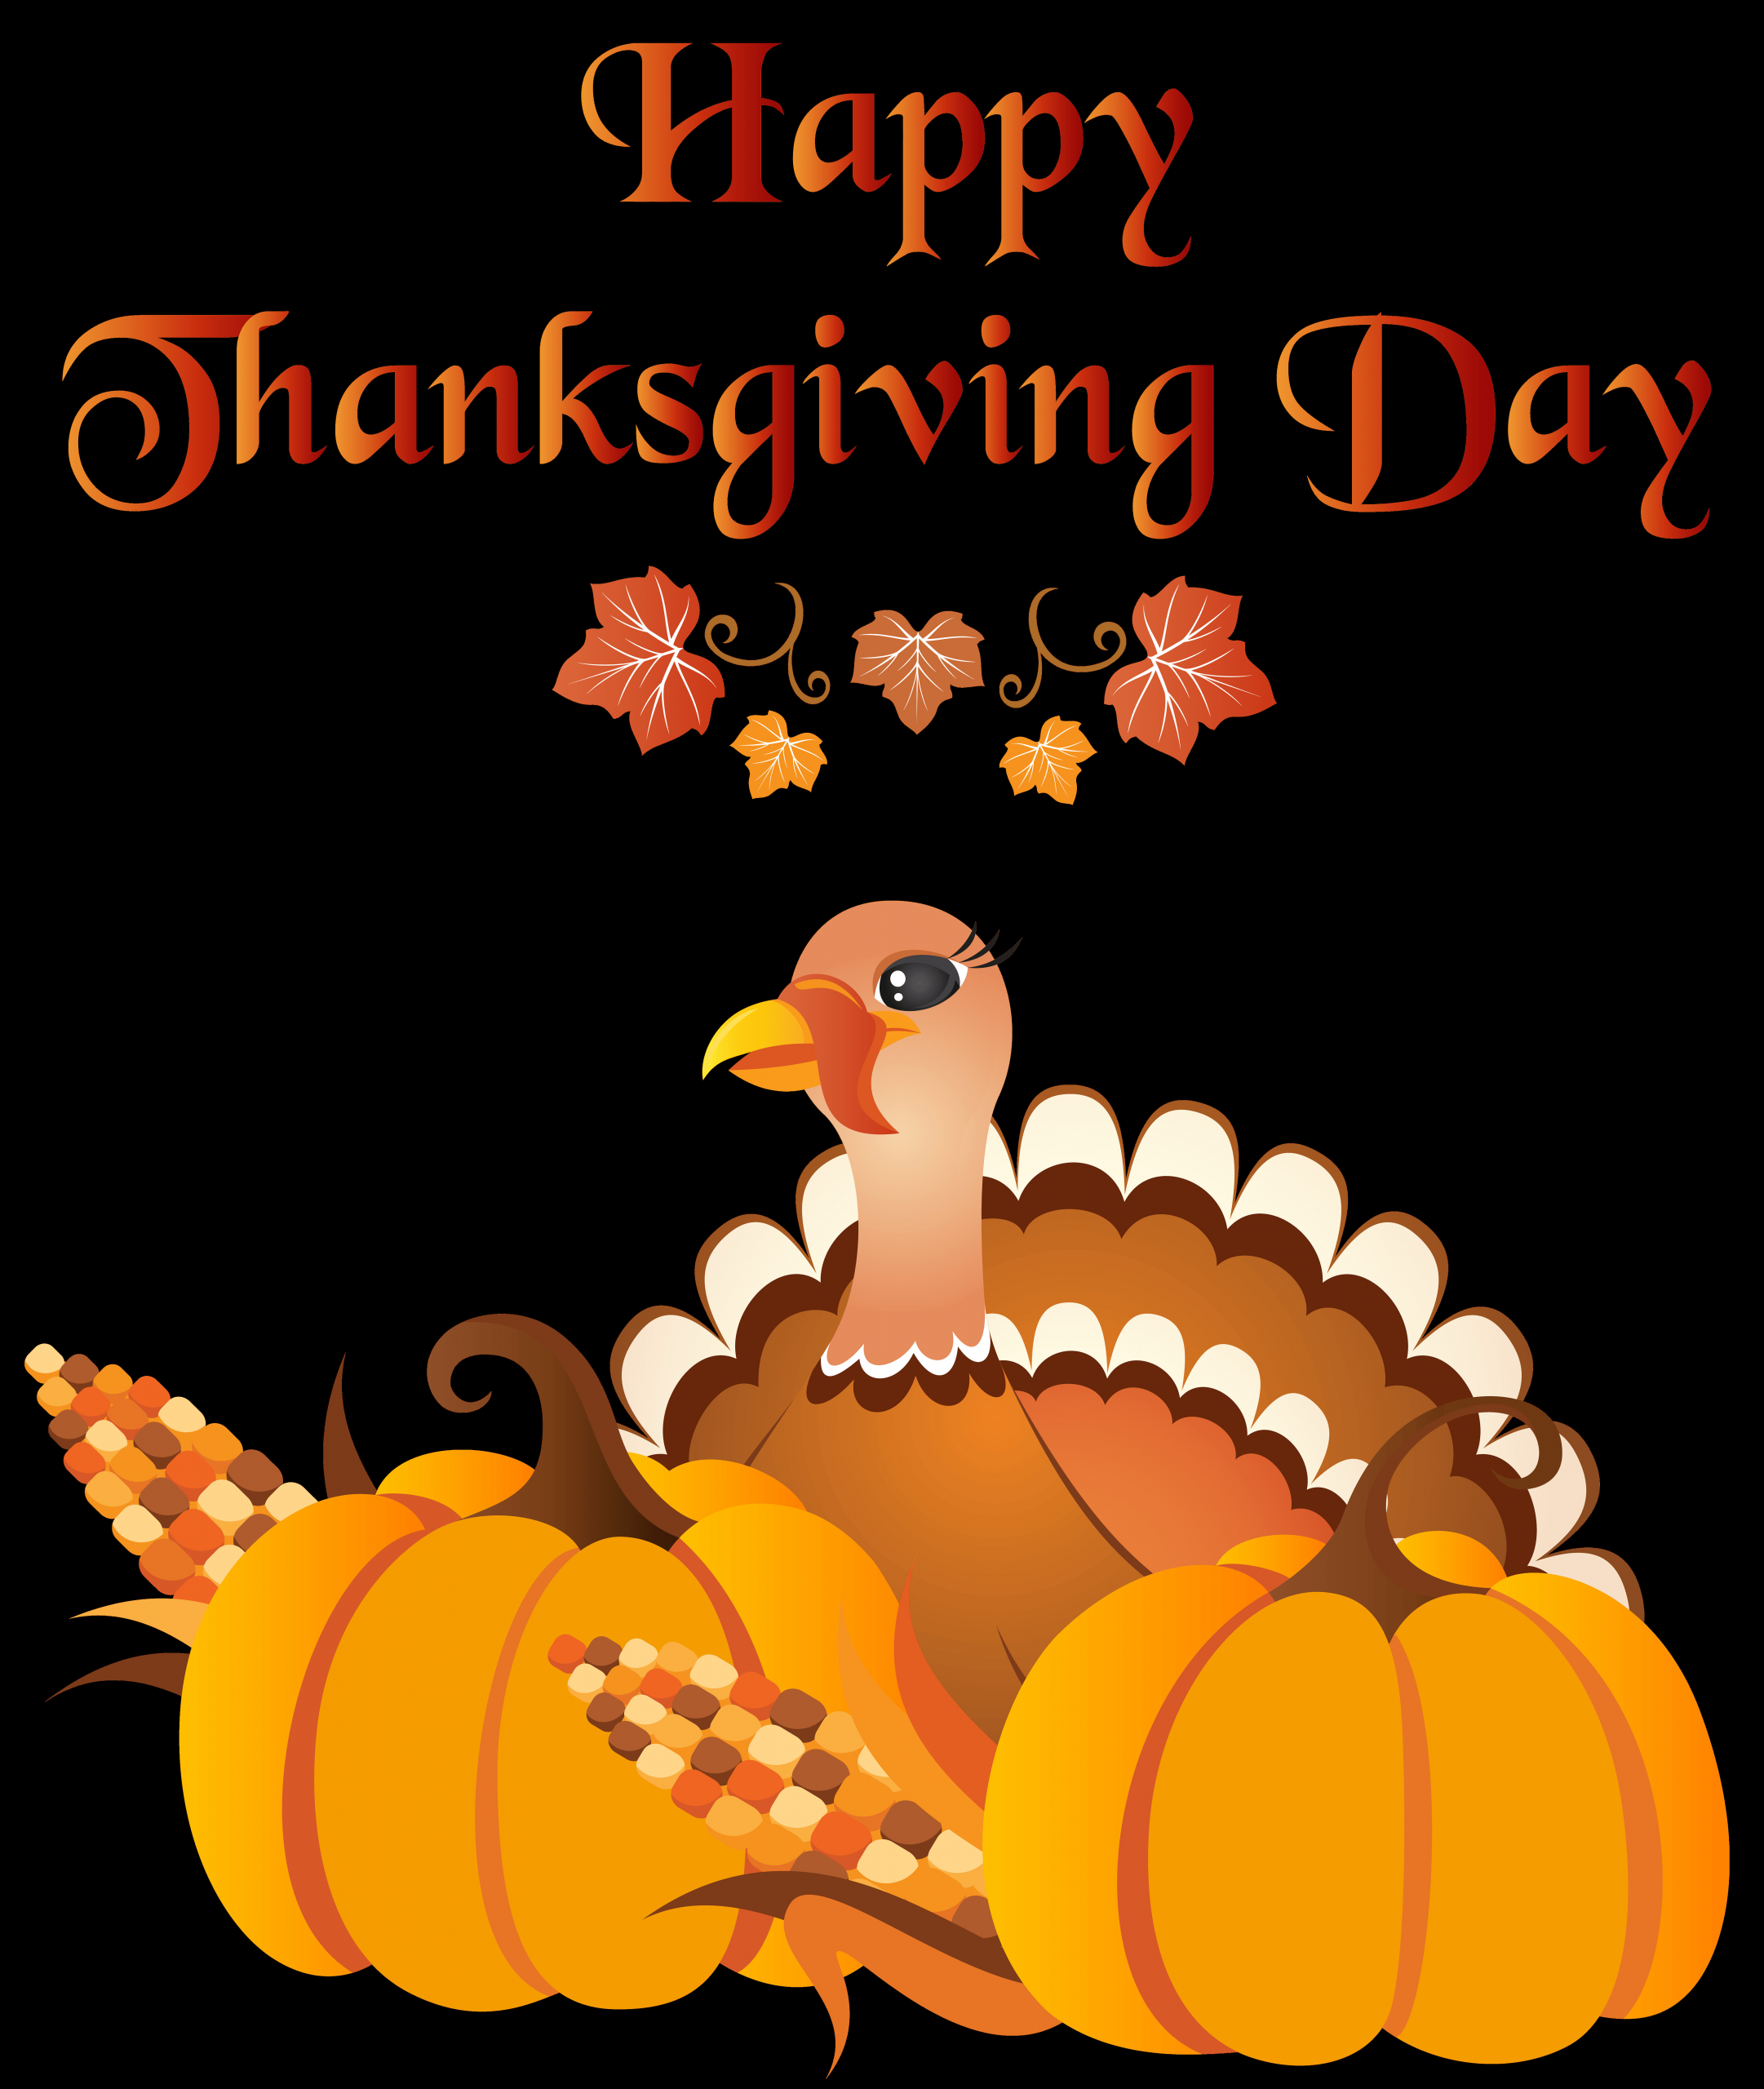 Happy Thanksgiving Turkey
 Happy Thanksgiving Day Wallpapers Wallpaper Cave